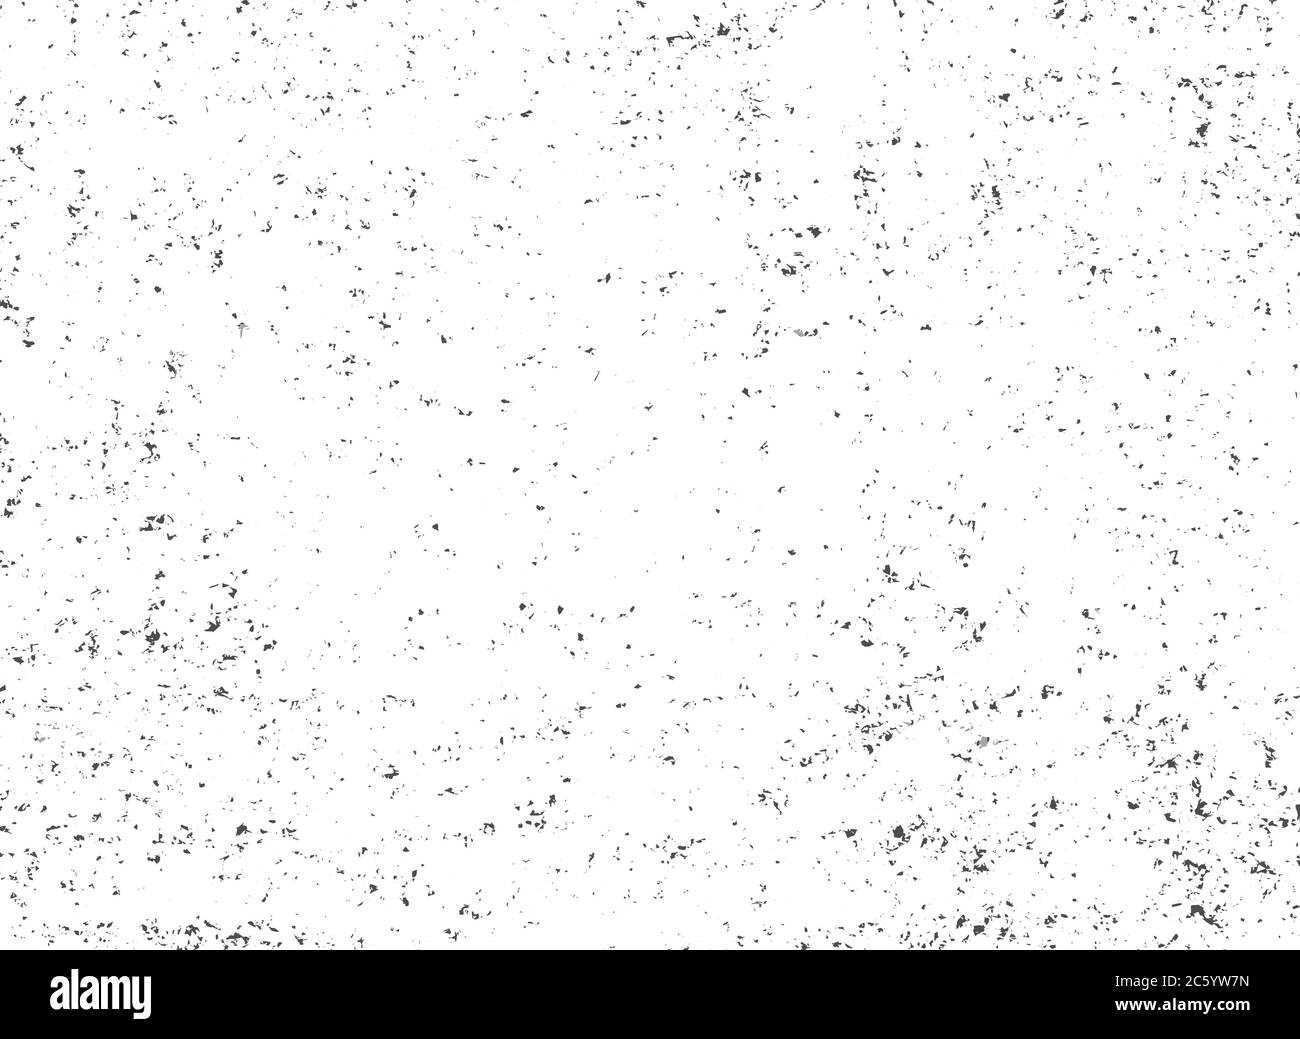 Grunge texture vector illustration background. Rubber stamp pattern. Isolated on white background. Stock Vector